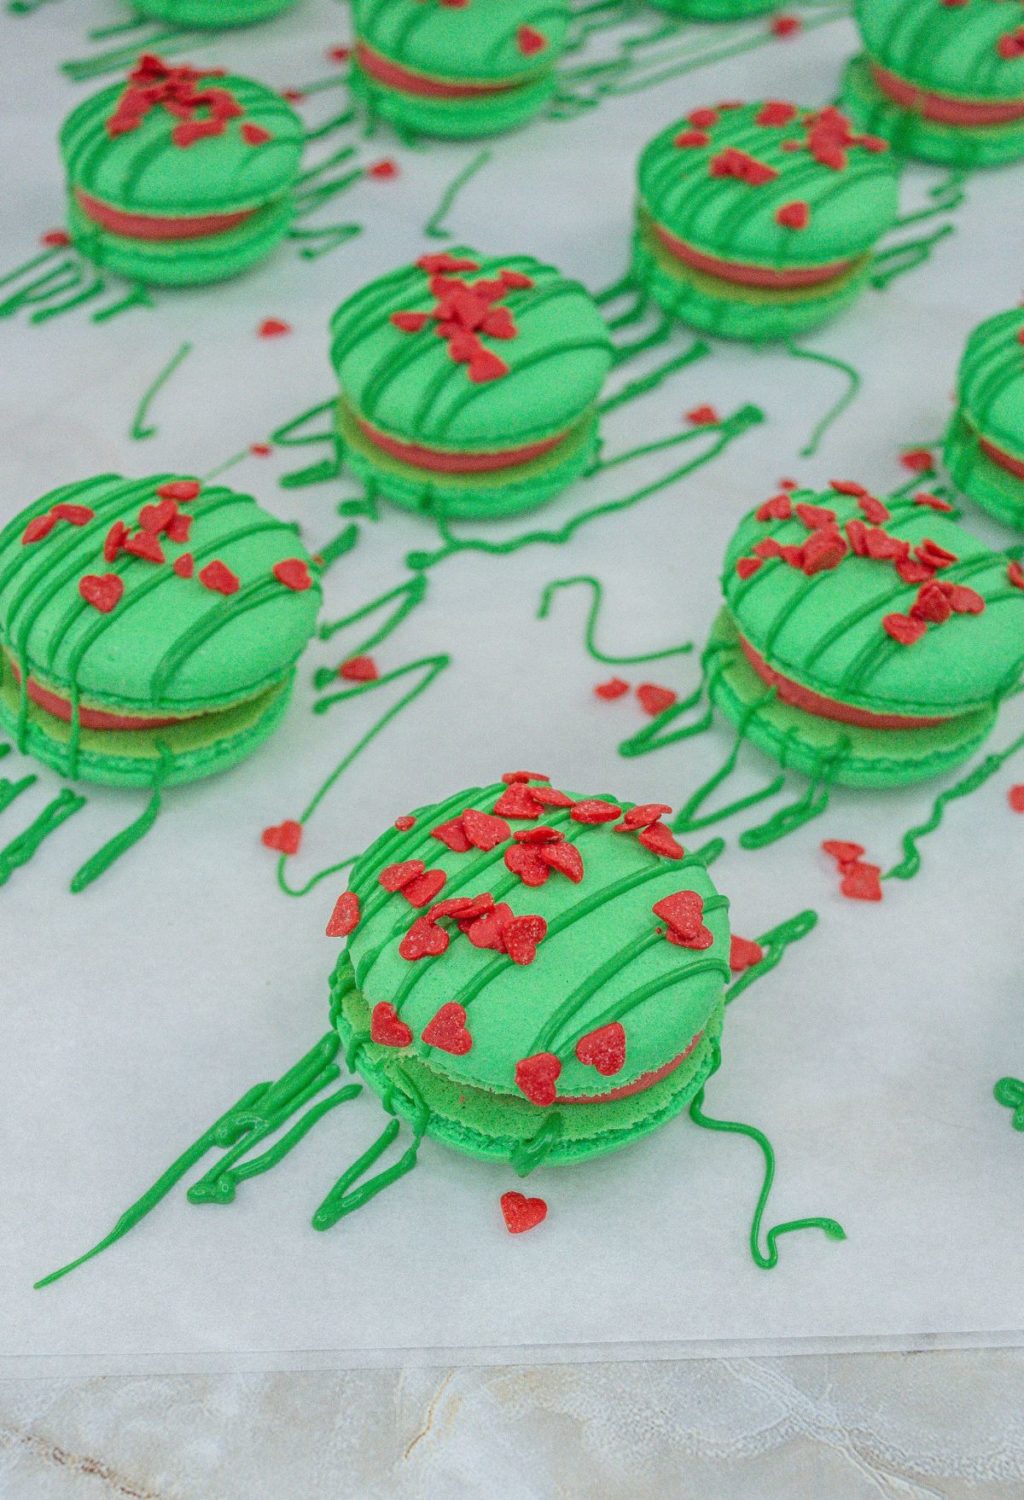 Christmas macarons with red and green sprinkles.